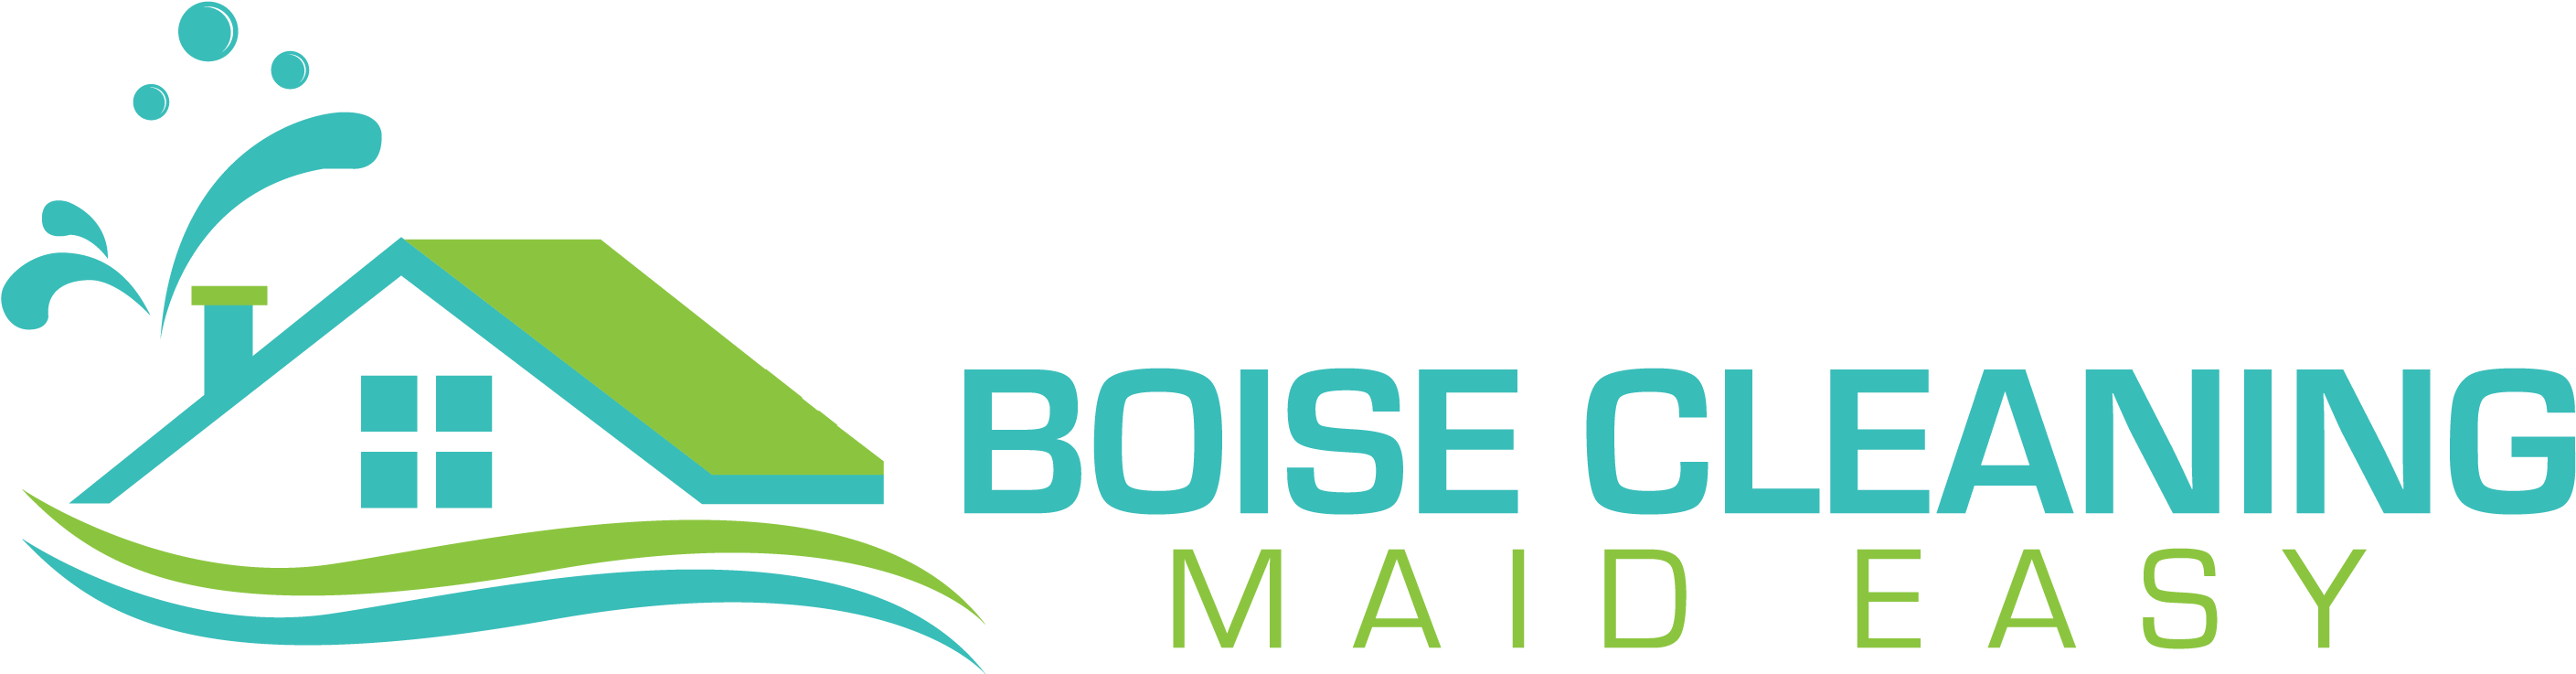 Boise Cleaning Maid Easy Logo PNG